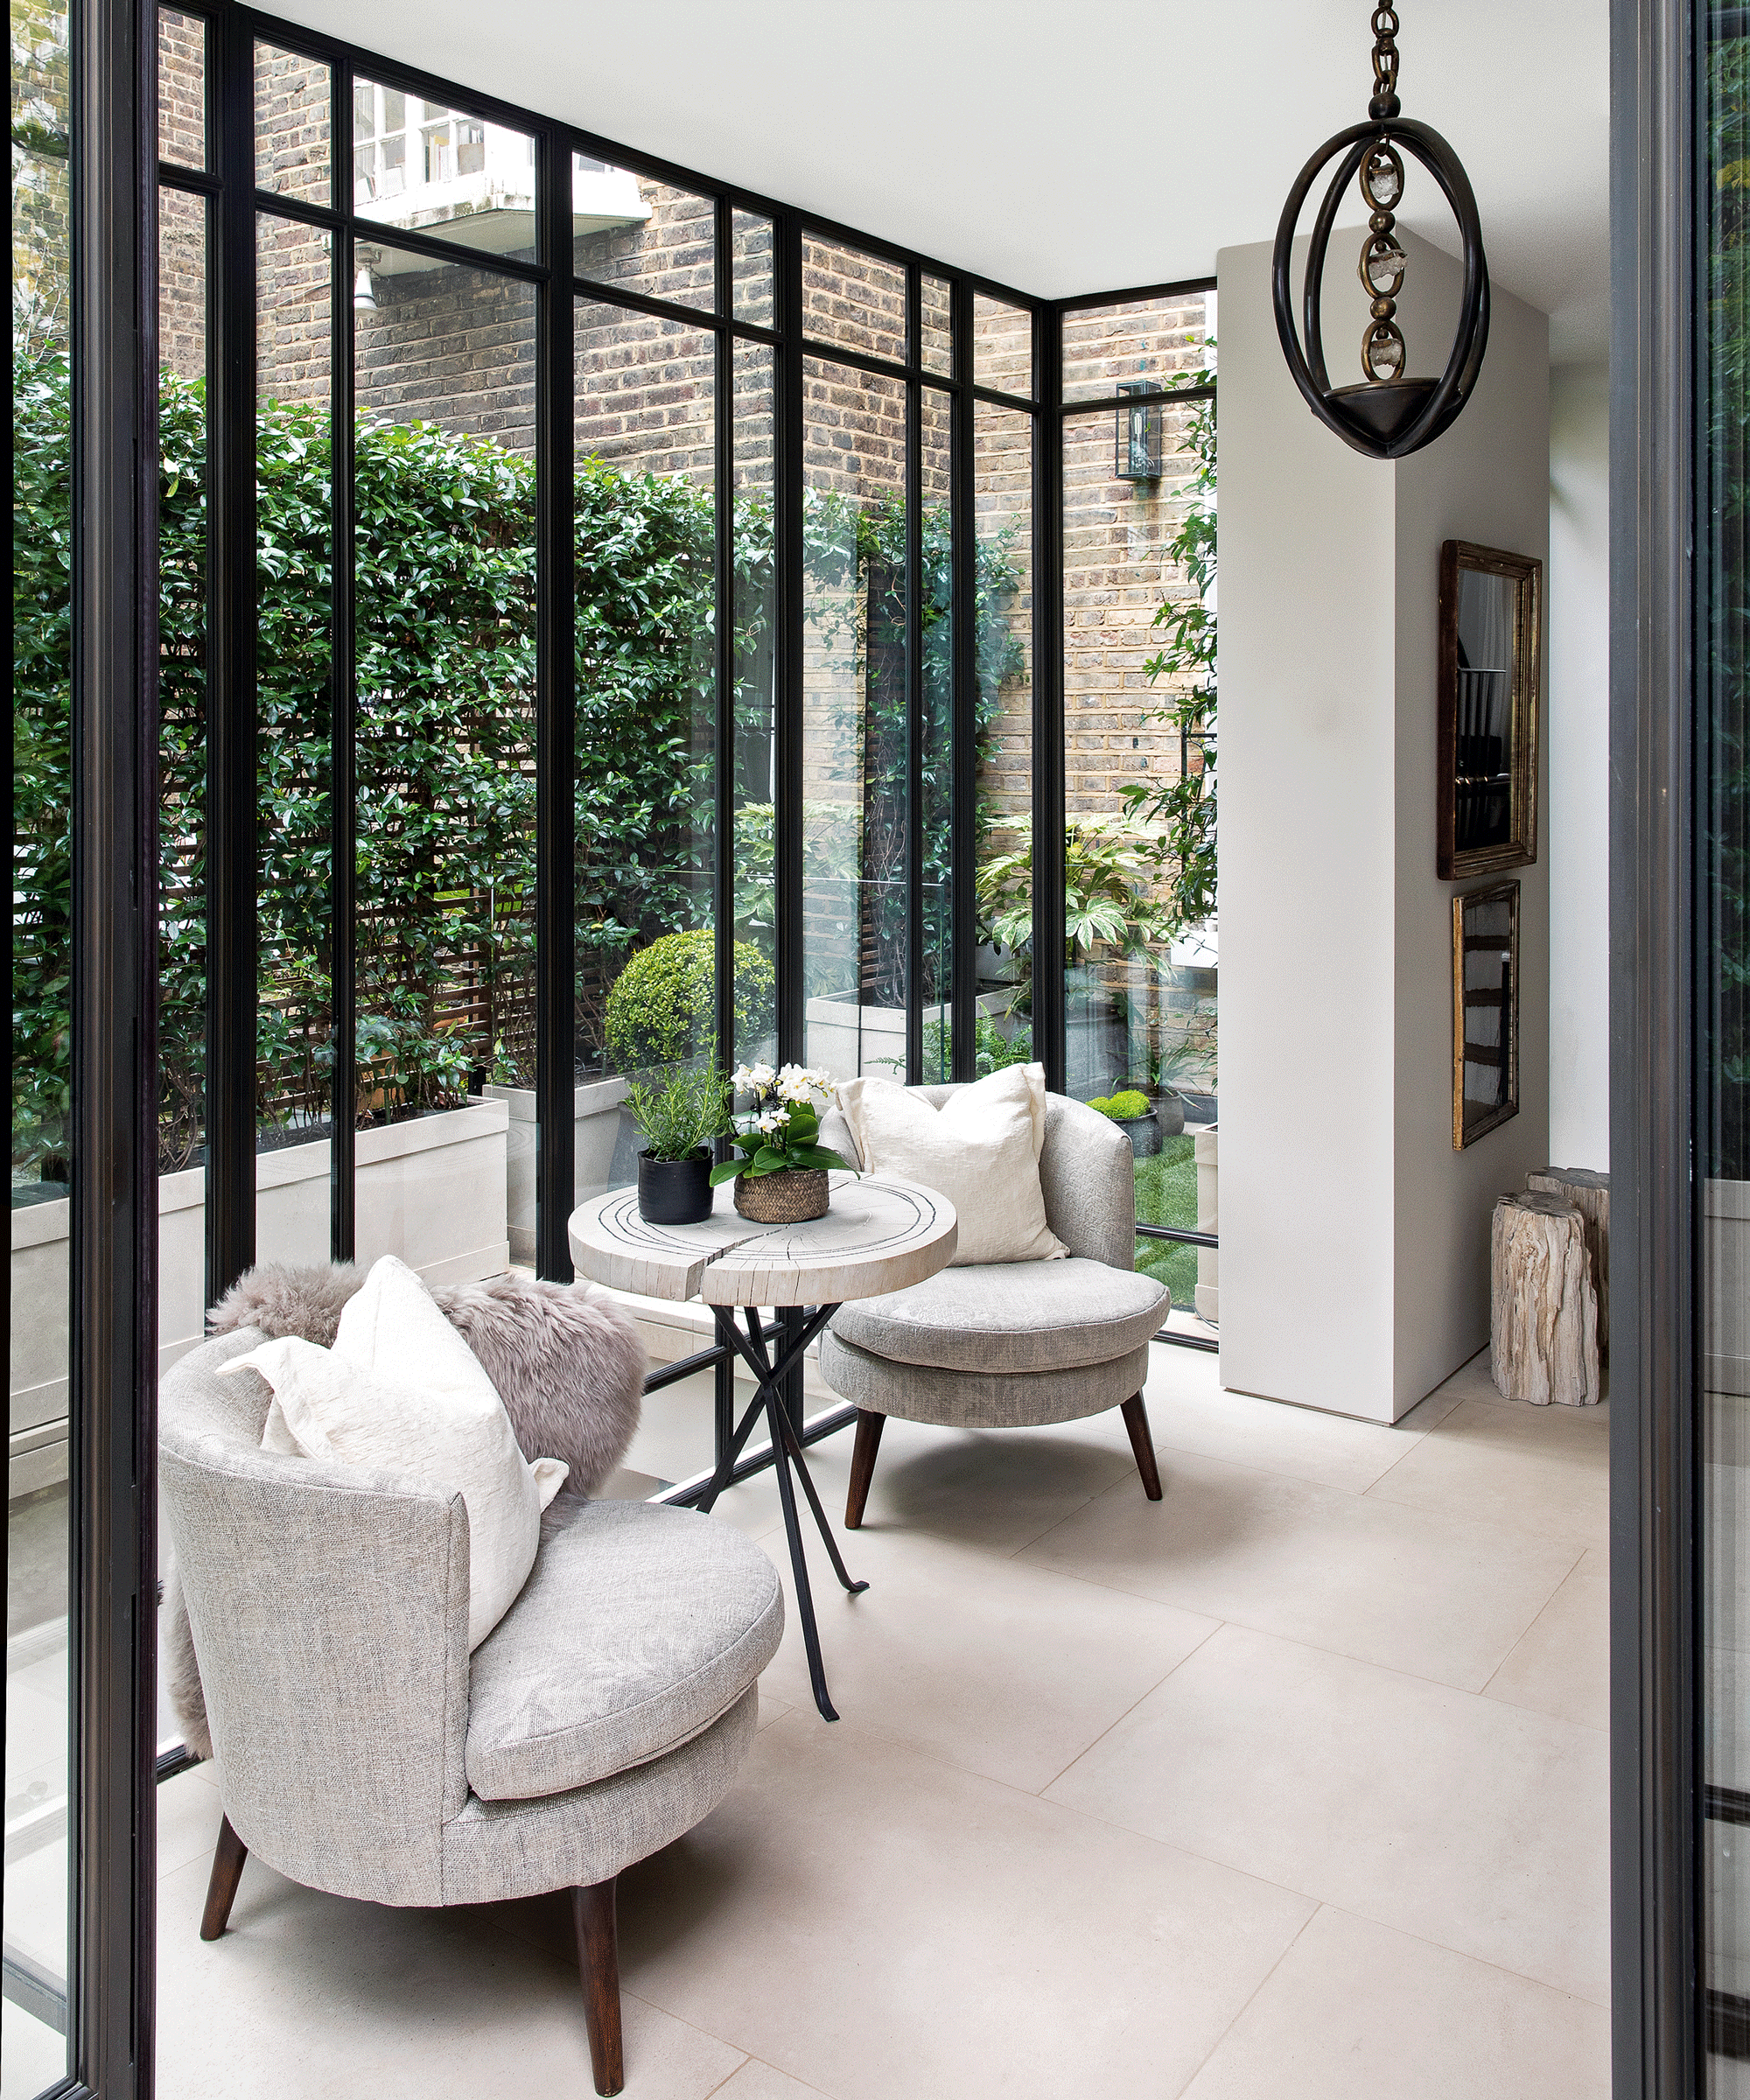 seating area with two chairs in glass walled room